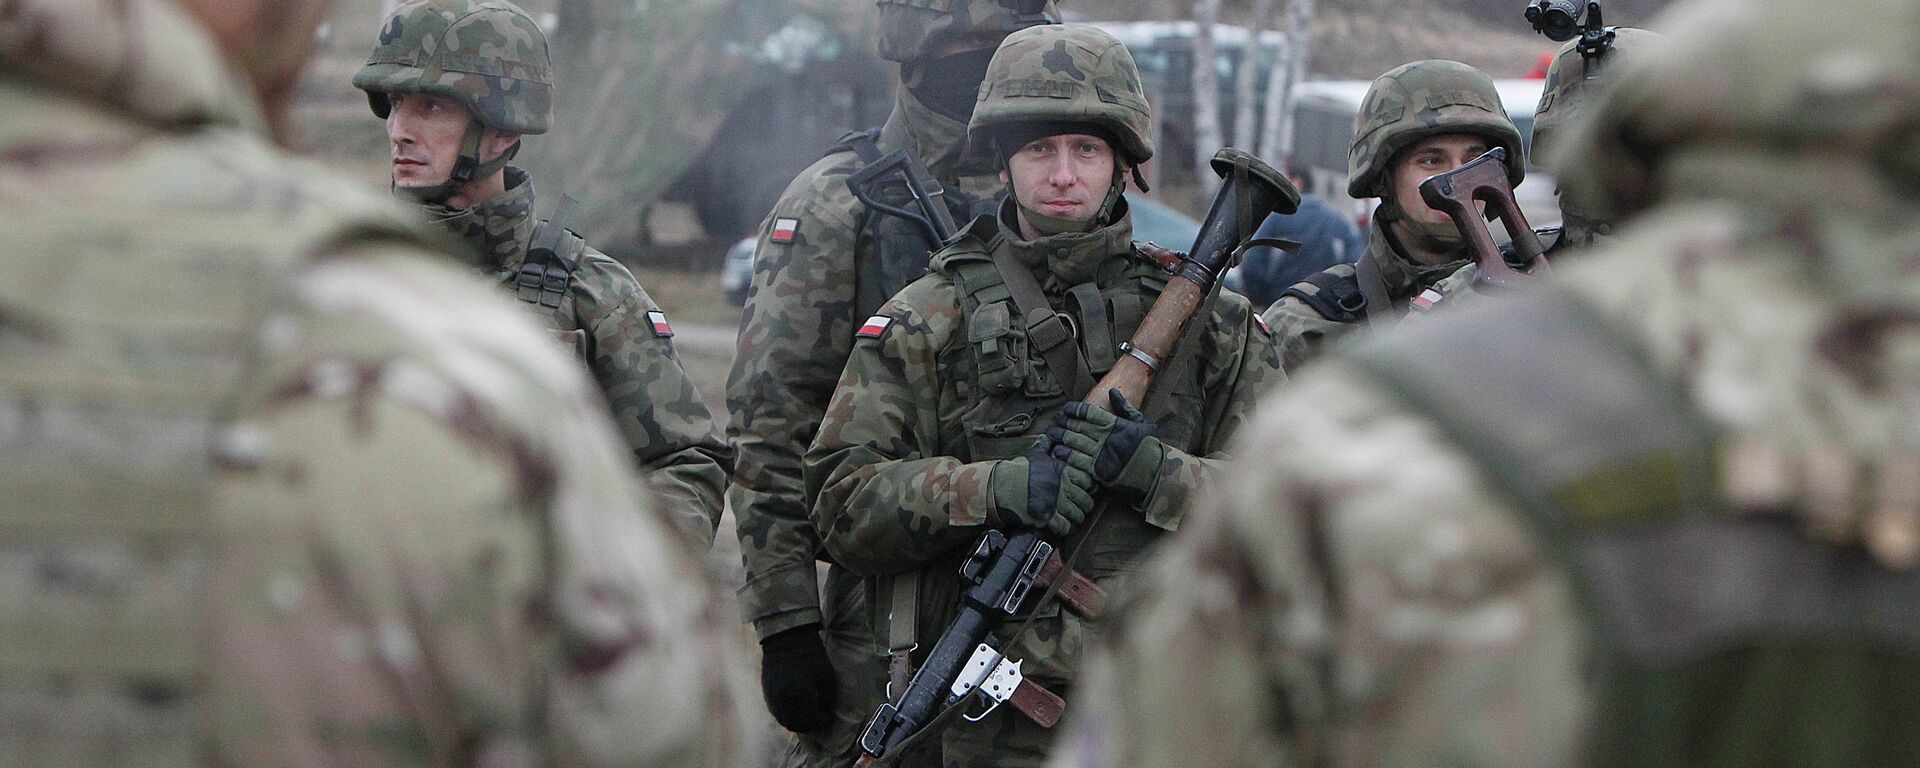 Polish troops take part in joint military exercise in Swietoszow, Poland, on Friday Nov. 21, 2014 - Sputnik International, 1920, 13.11.2021